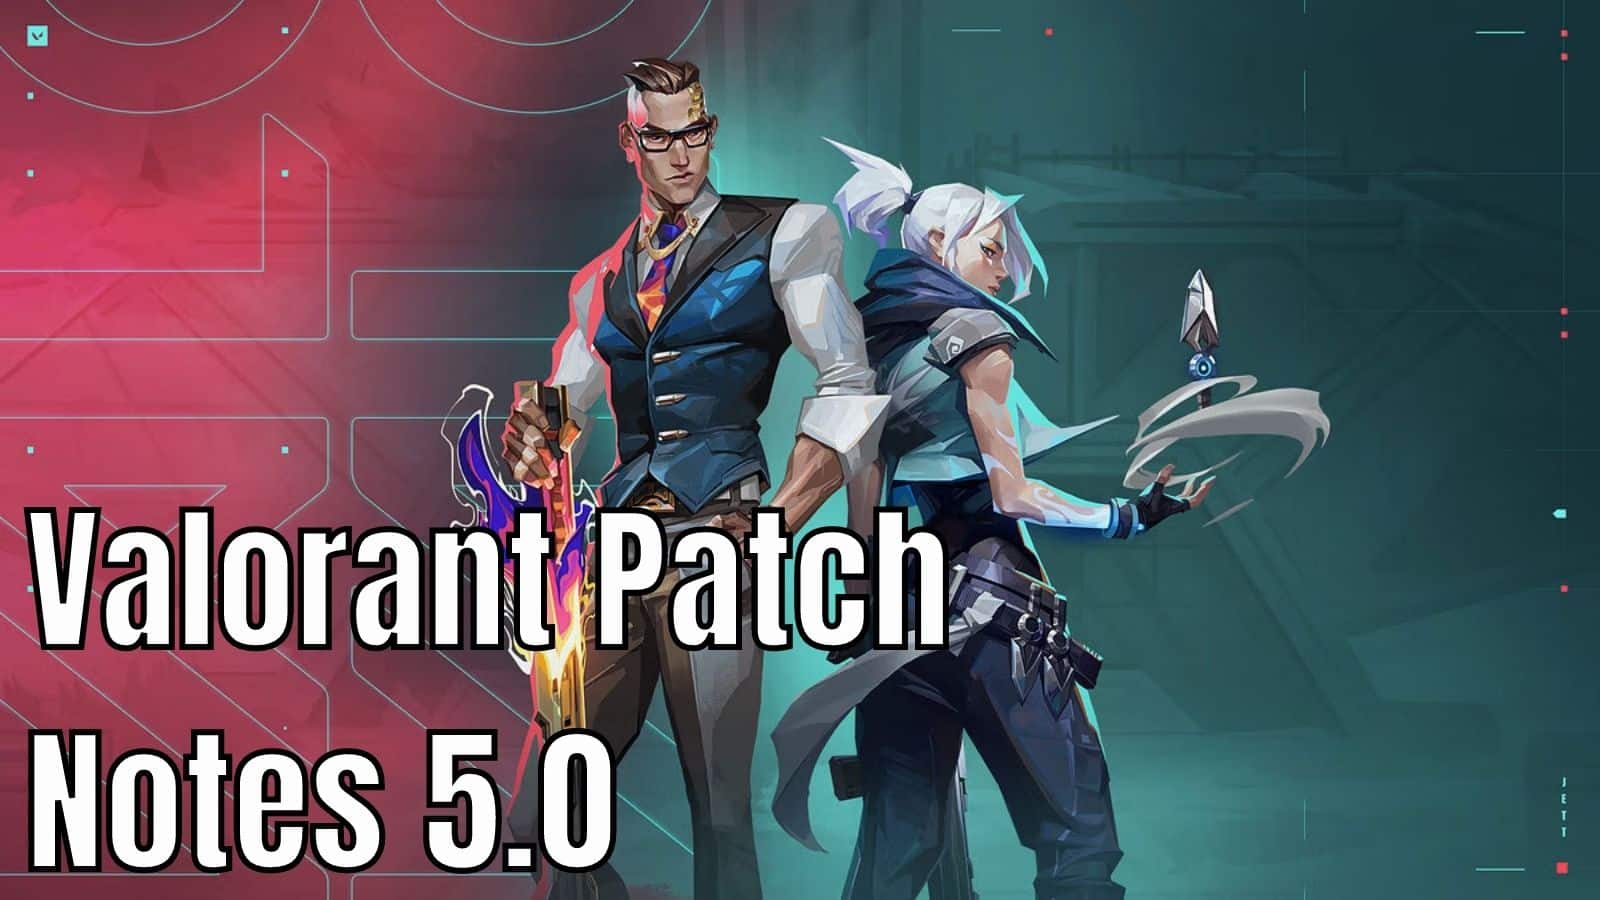 Valorant' patch 5.0 will take Split out of rotation when it adds Pearl